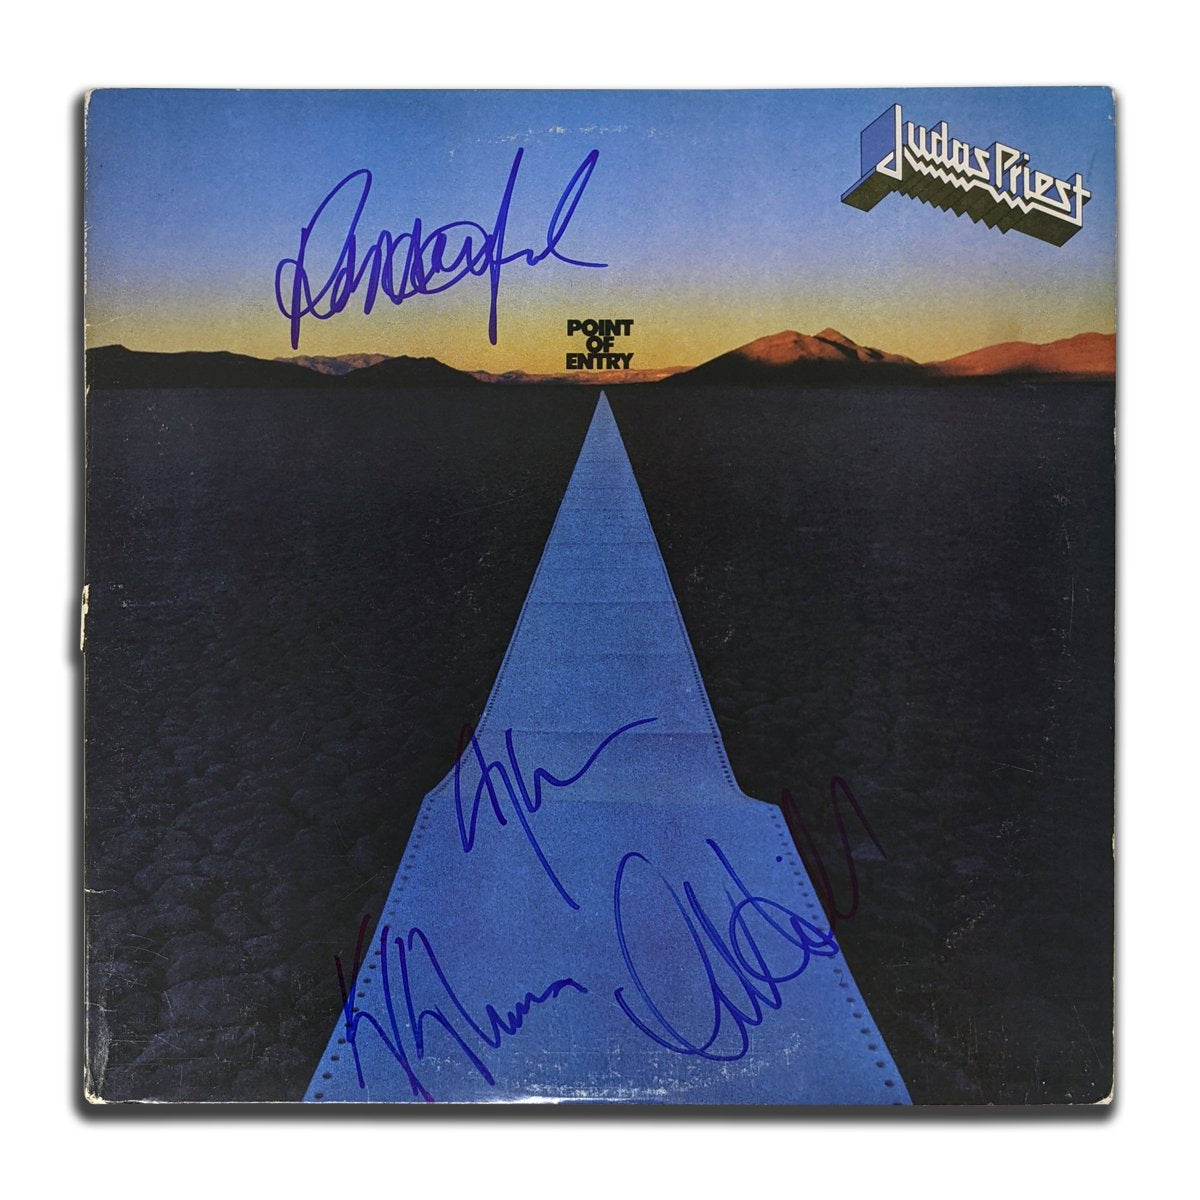 Halford Hill Downing Tipton Signed Judas Priest POINT OF ENTRY Autographed Vinyl Album LP